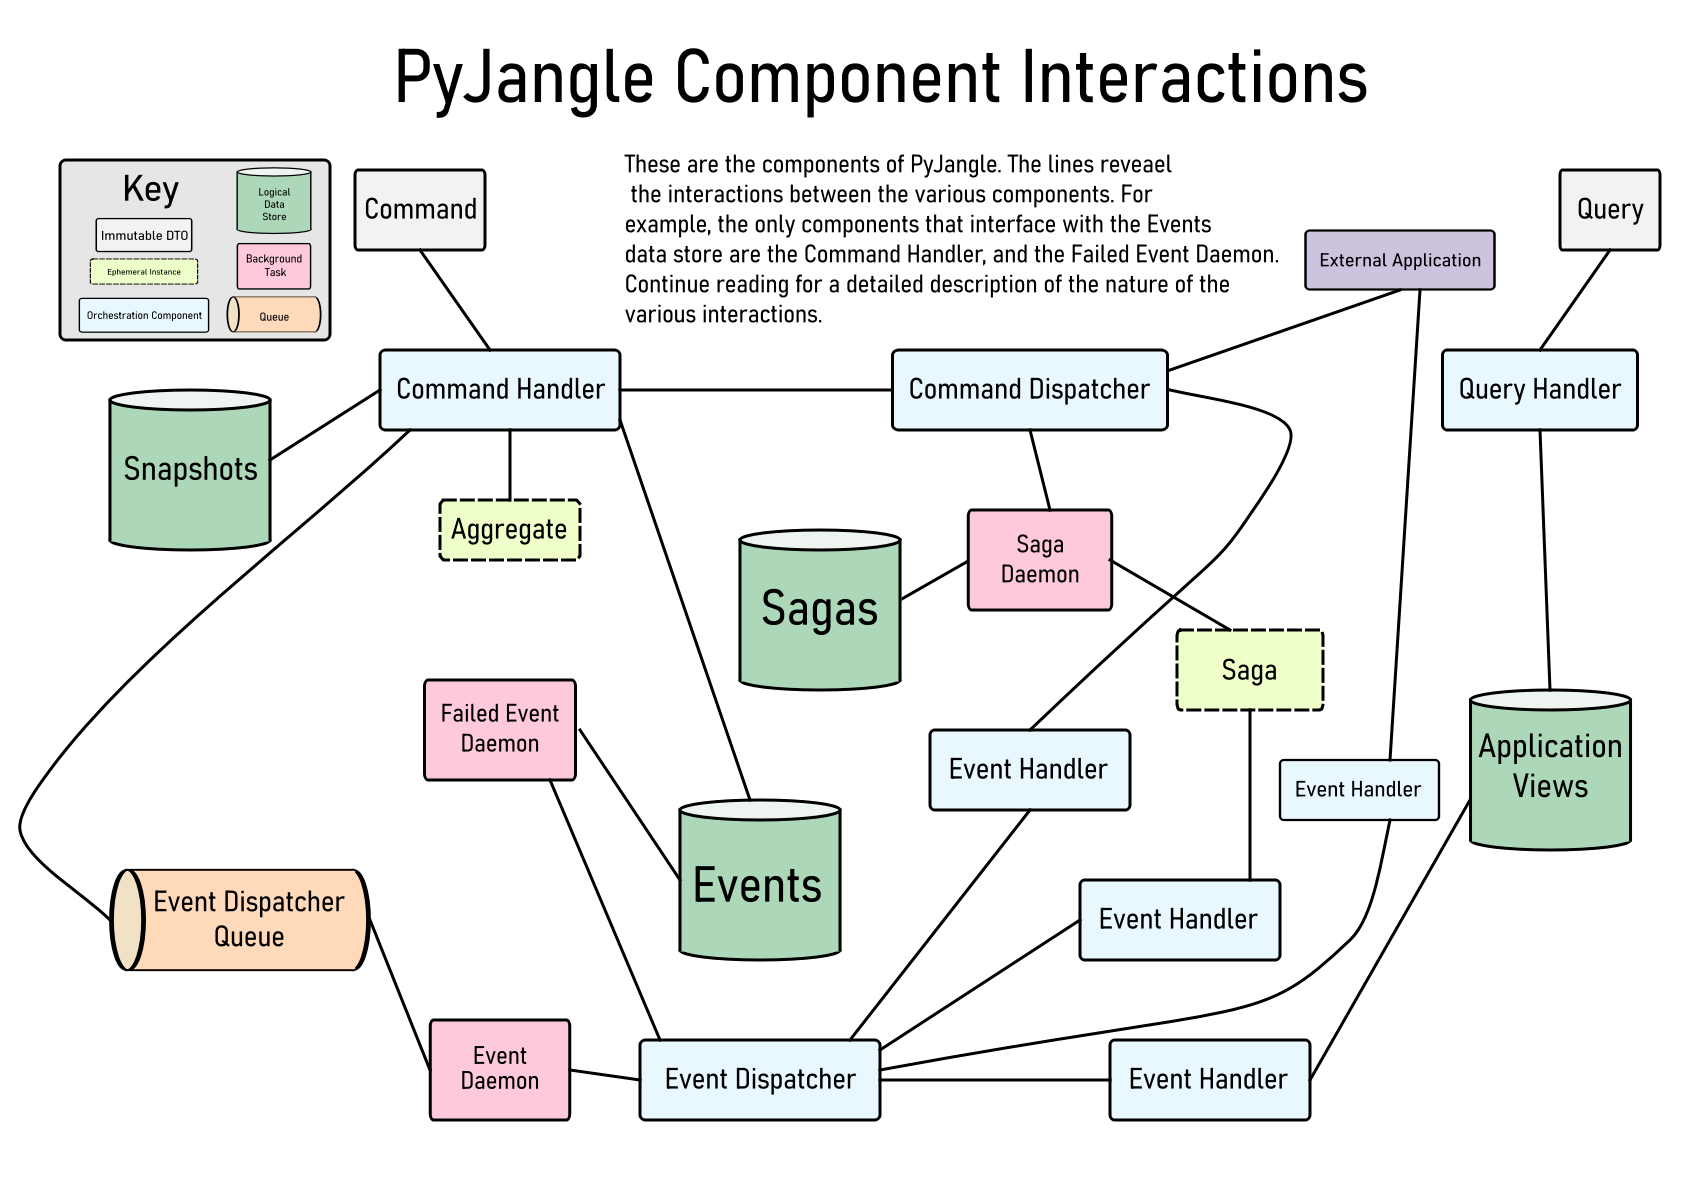 Potential interactions in the PyJangle Framework